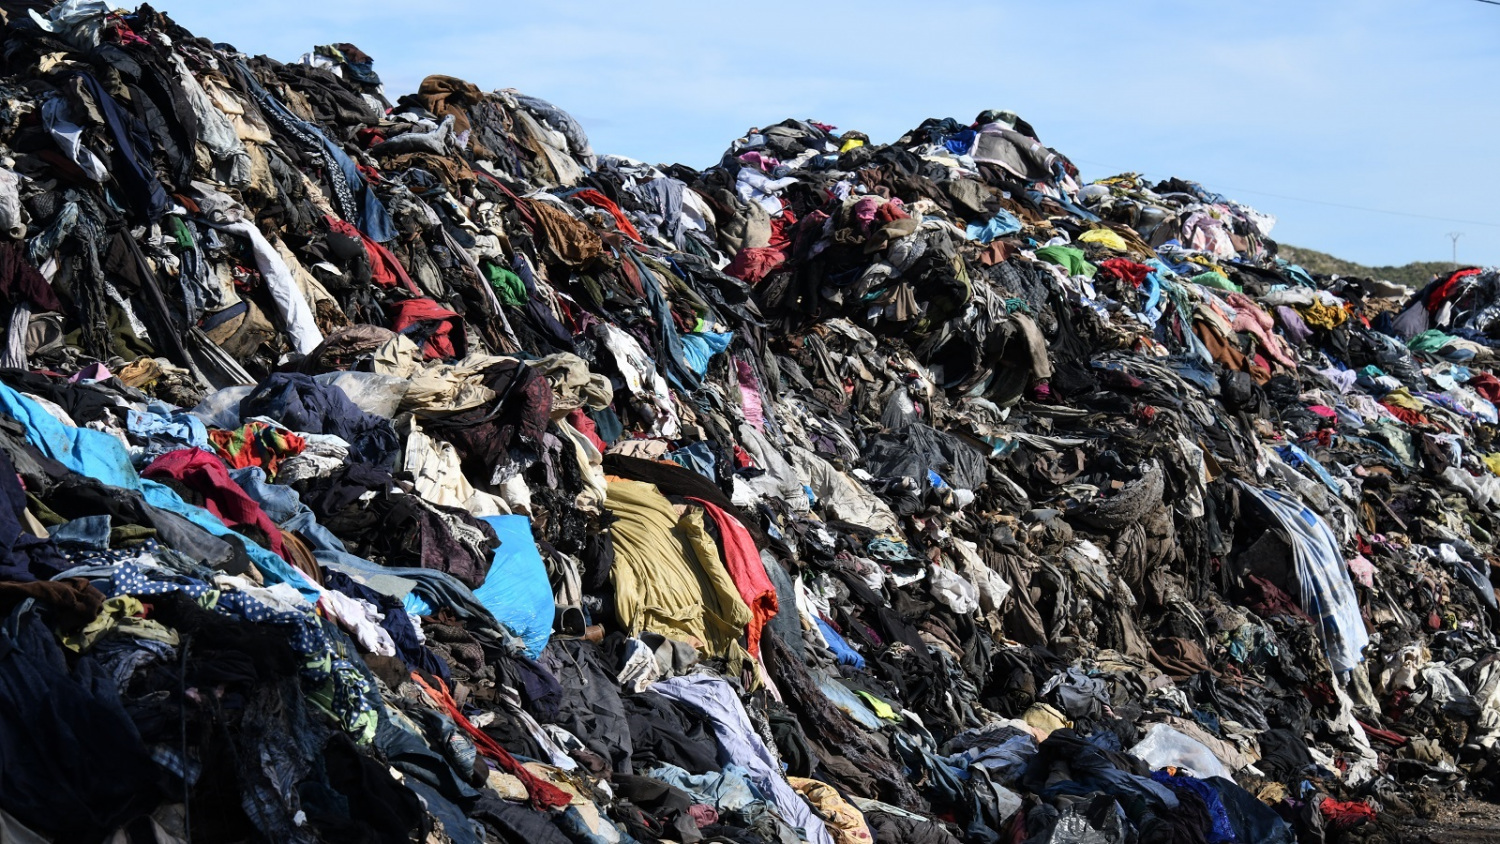 Commentary: Why can't the fashion industry recycle discarded clothes? - CNA